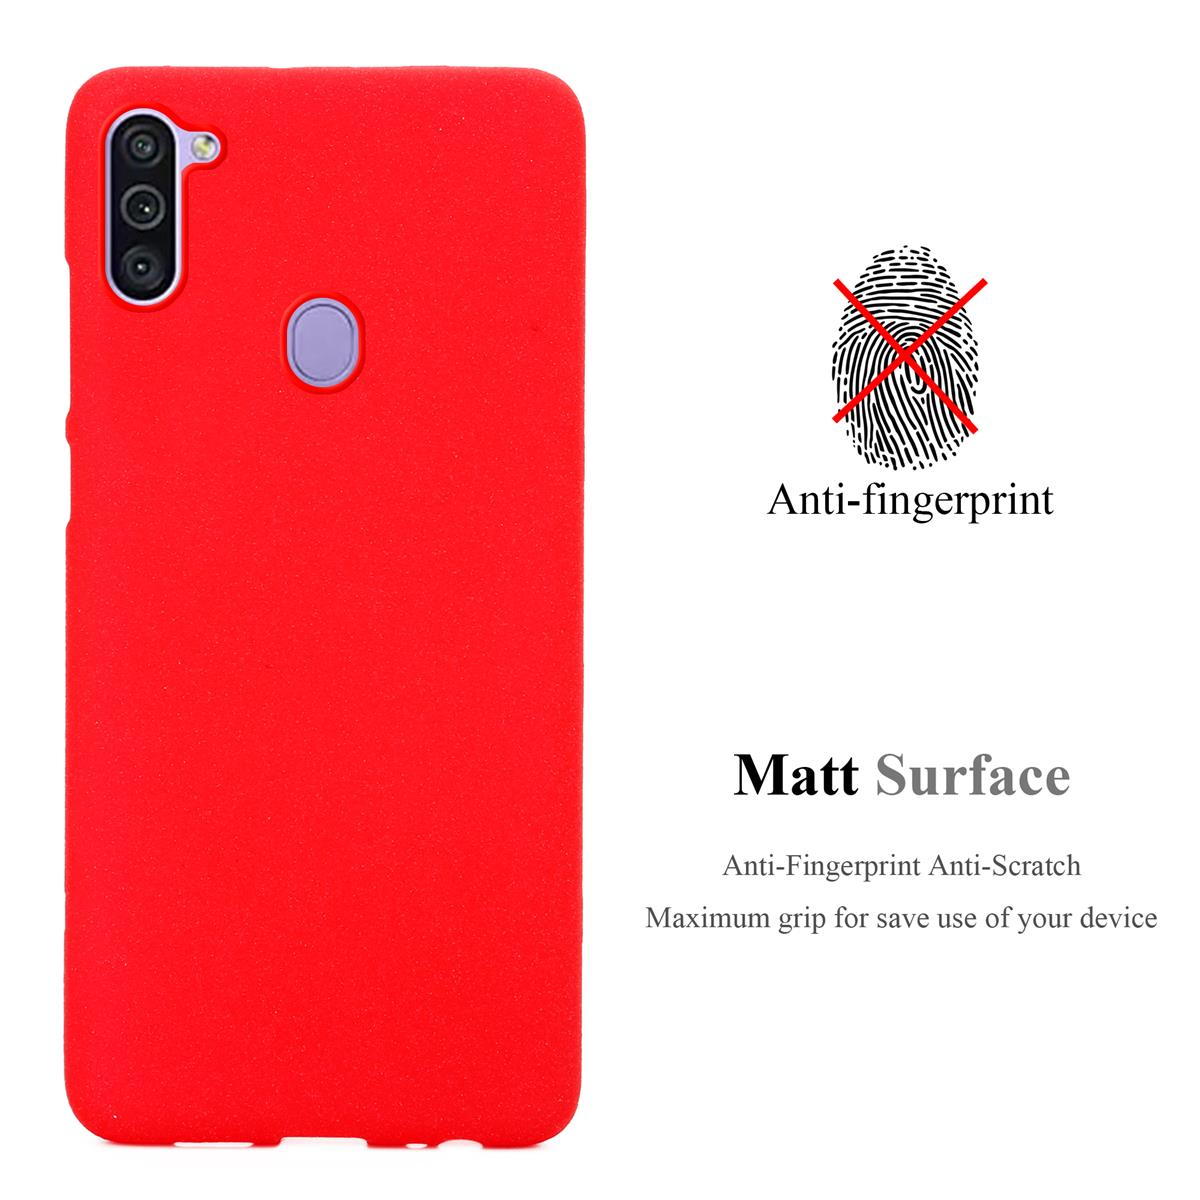 Frosted Backcover, Galaxy M11, ROT A11 / TPU CADORABO Samsung, Schutzhülle, FROST